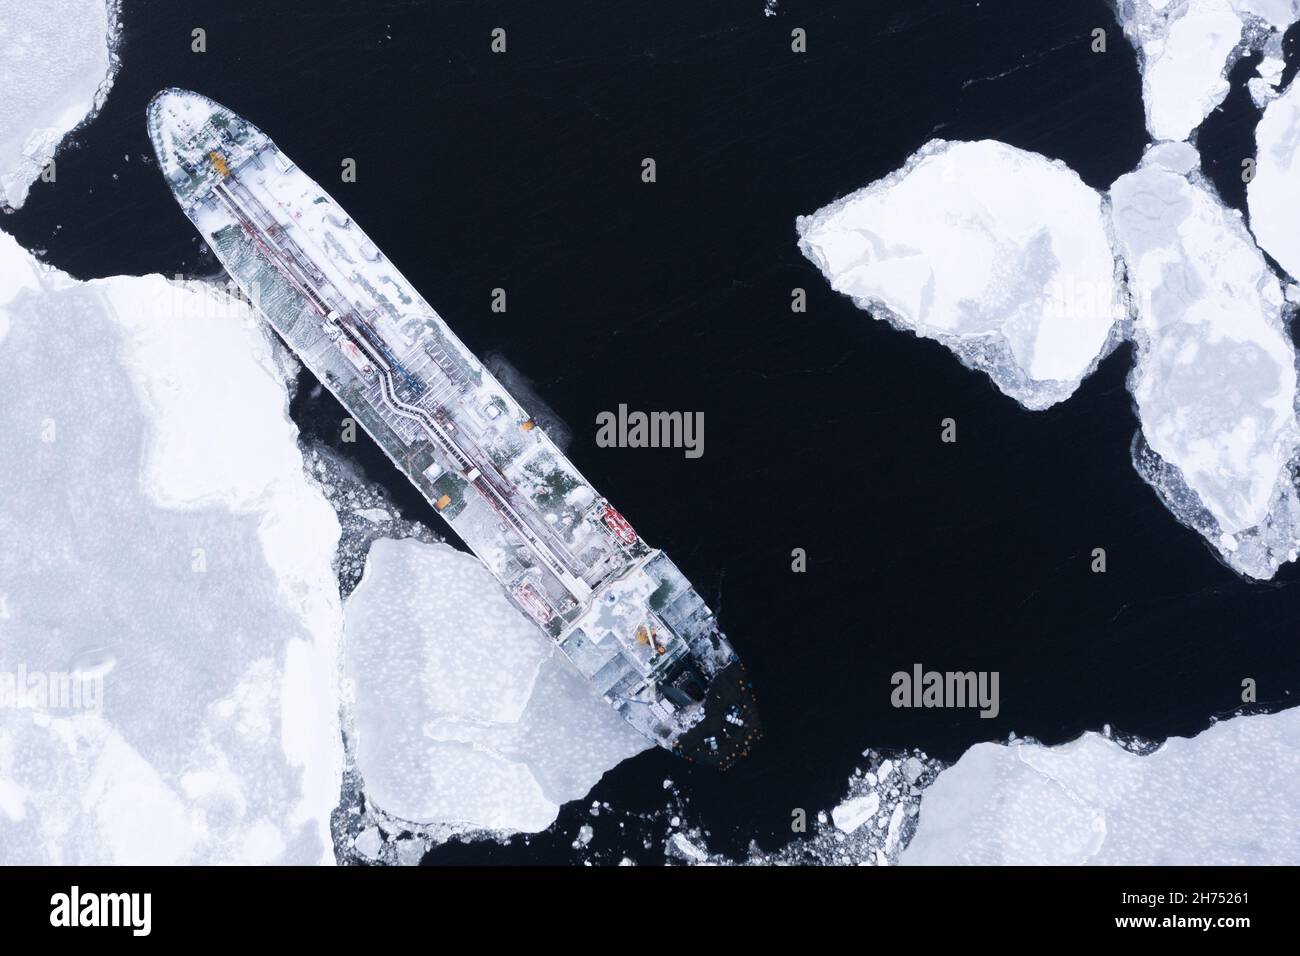 The ship is in the sea among the ice. Stock Photo